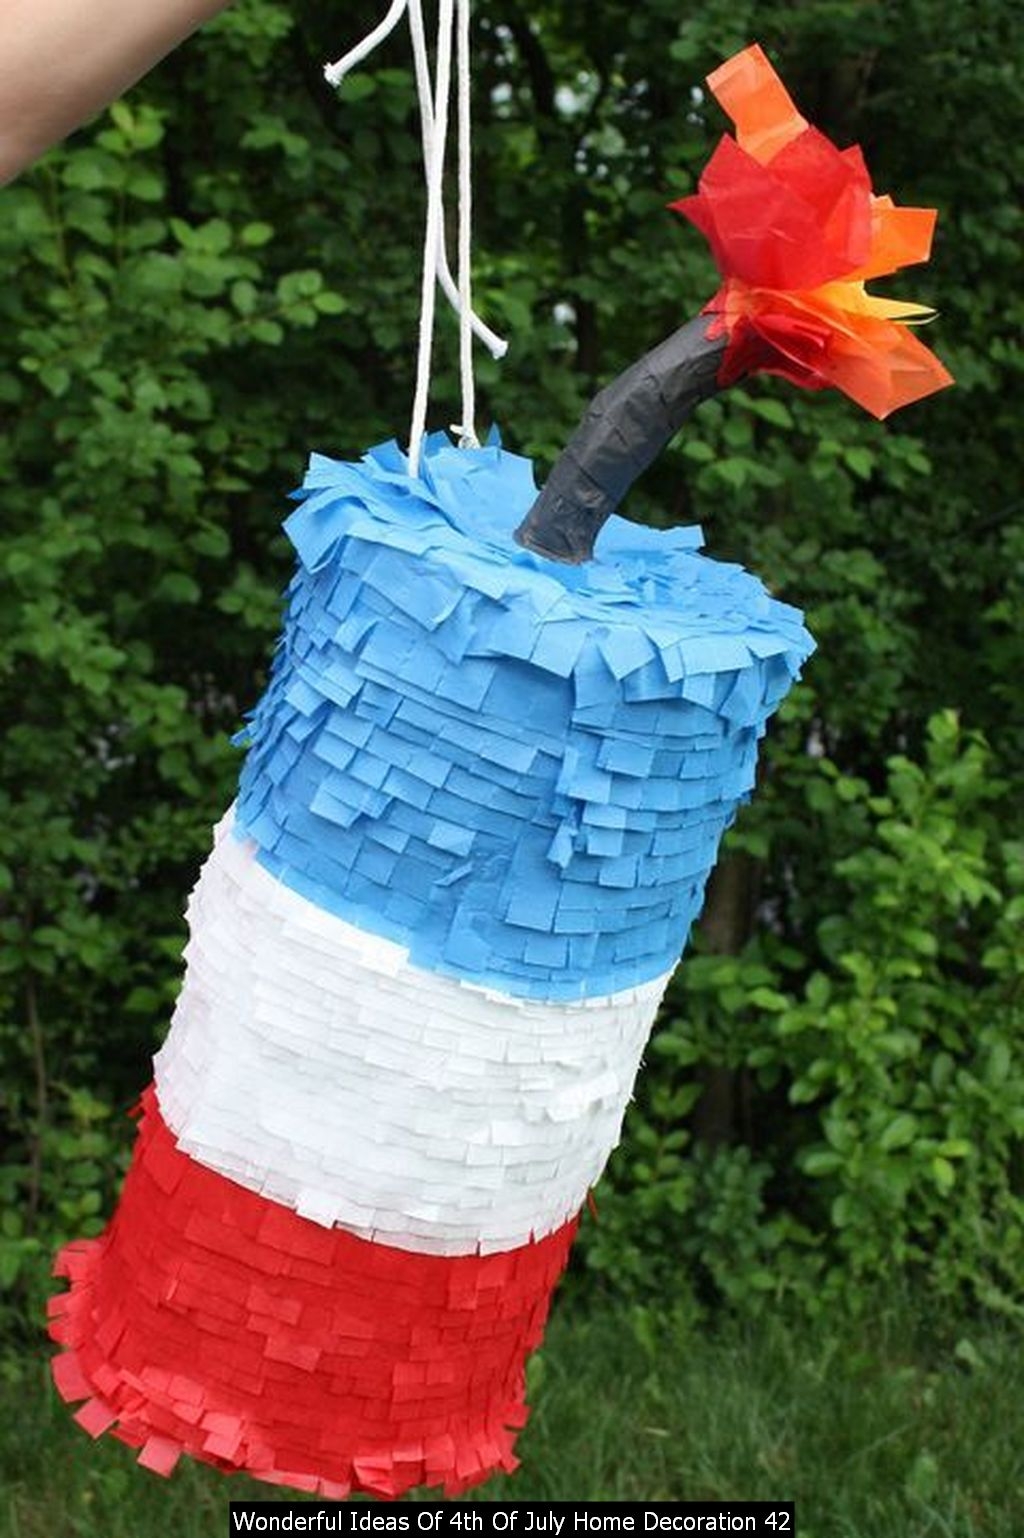 Wonderful Ideas Of 4th Of July Home Decoration 42